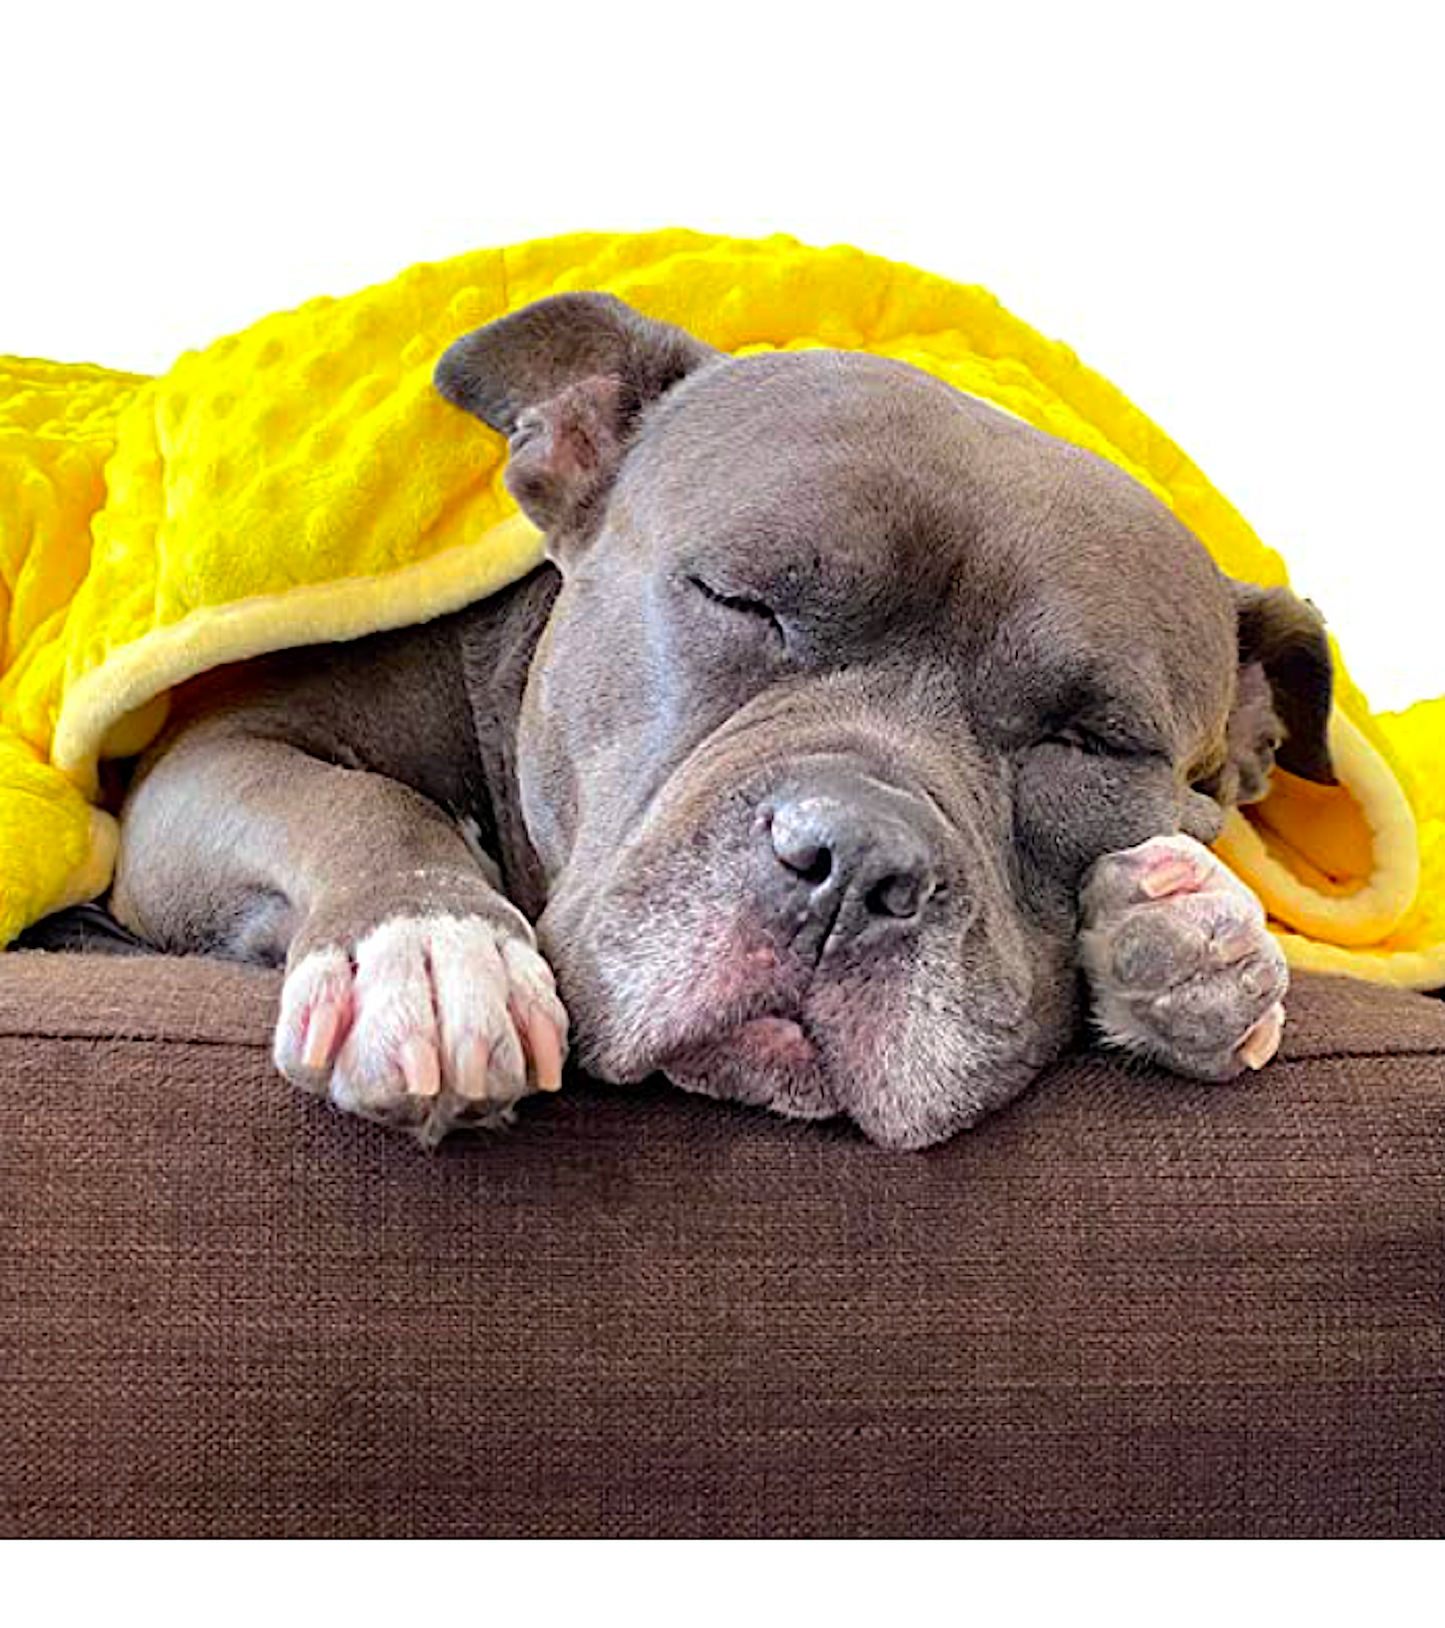 PAWFECT ANTI-ANXIETY WEIGHTED PET BLANKET: helps reduce stress and anxiety in your pet